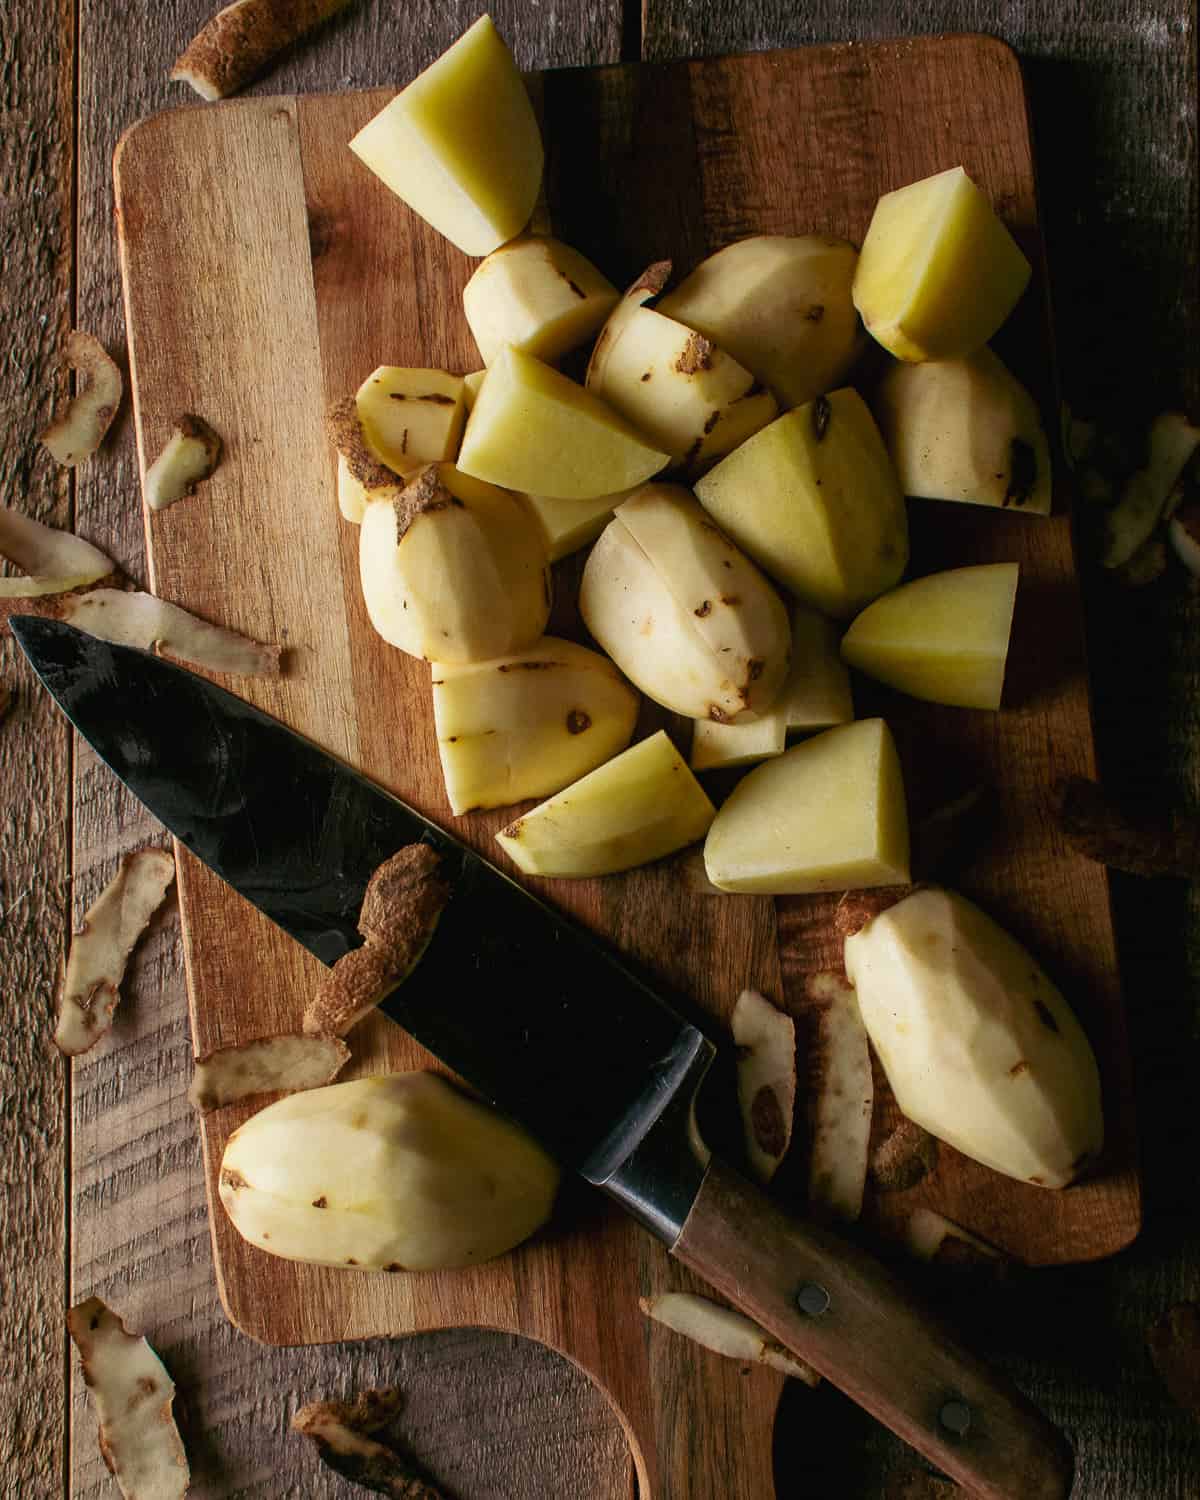 diced potatoes on cutting board with knife.